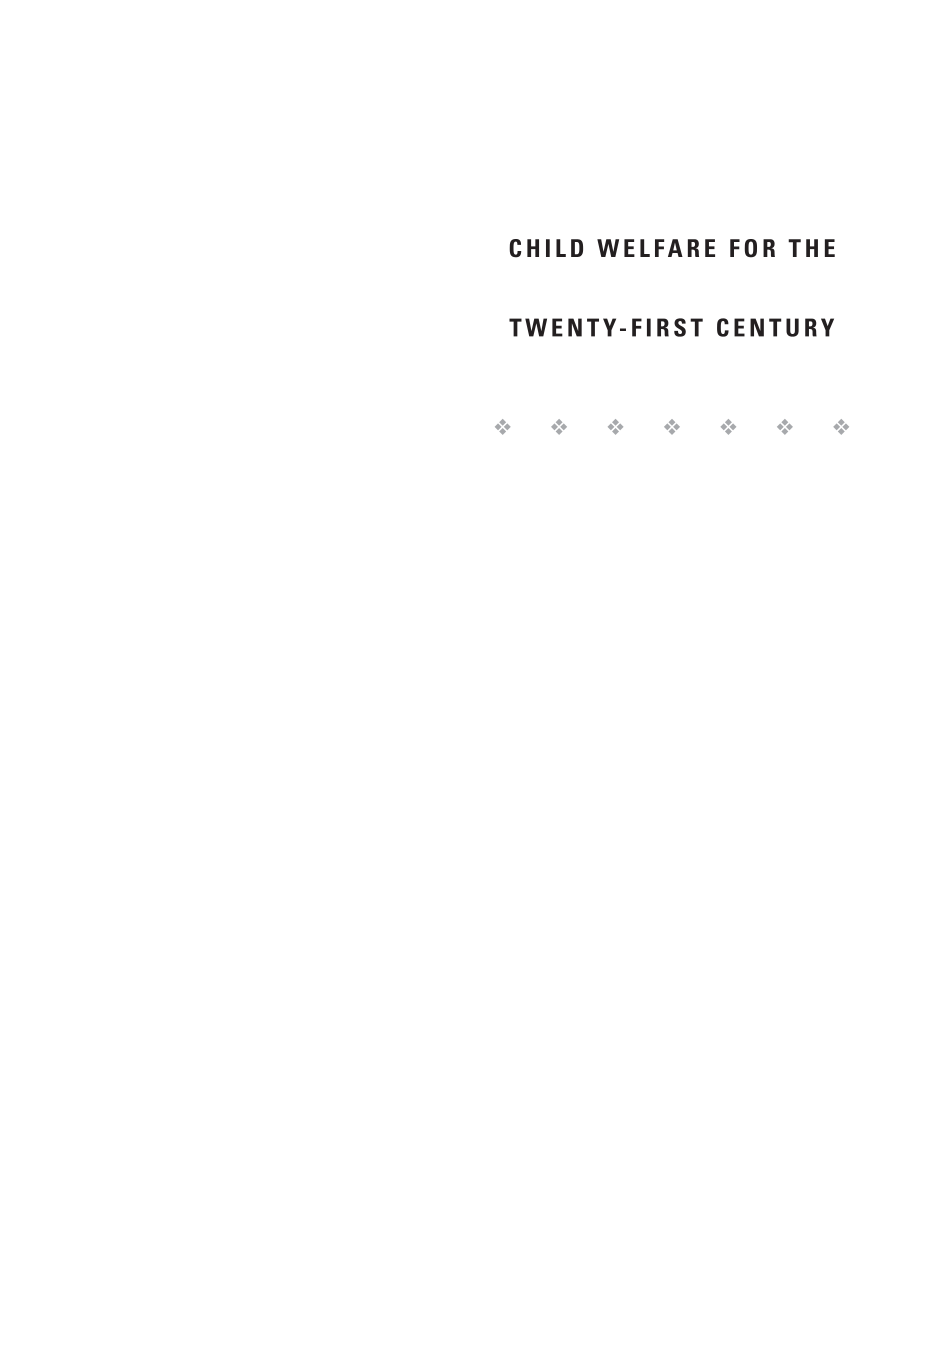 Child Welfare for the Twenty-first Century: A Handbook of Practices, Policies, and Programs, second edition page xix